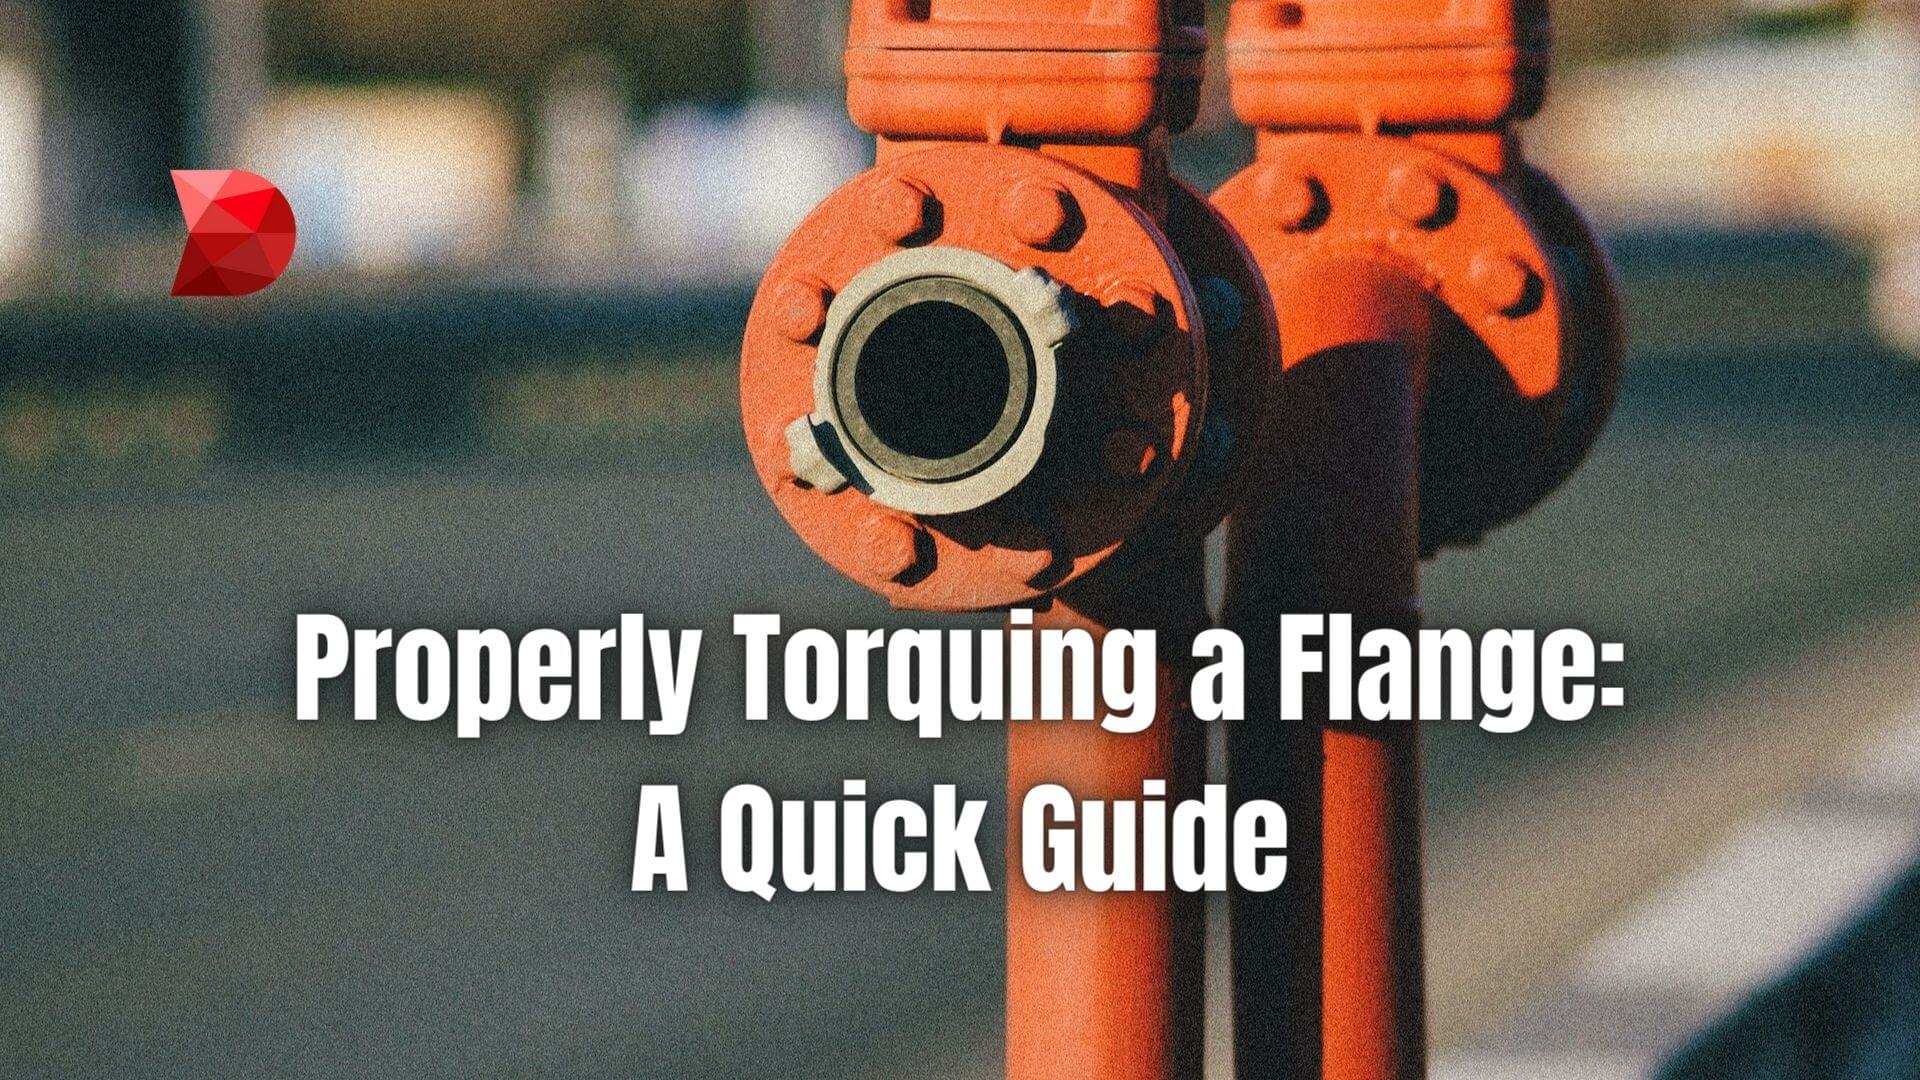 The secret to ensuring secure pipeline connections is tightening the flange bolts to the proper torque range. Click here to learn how!